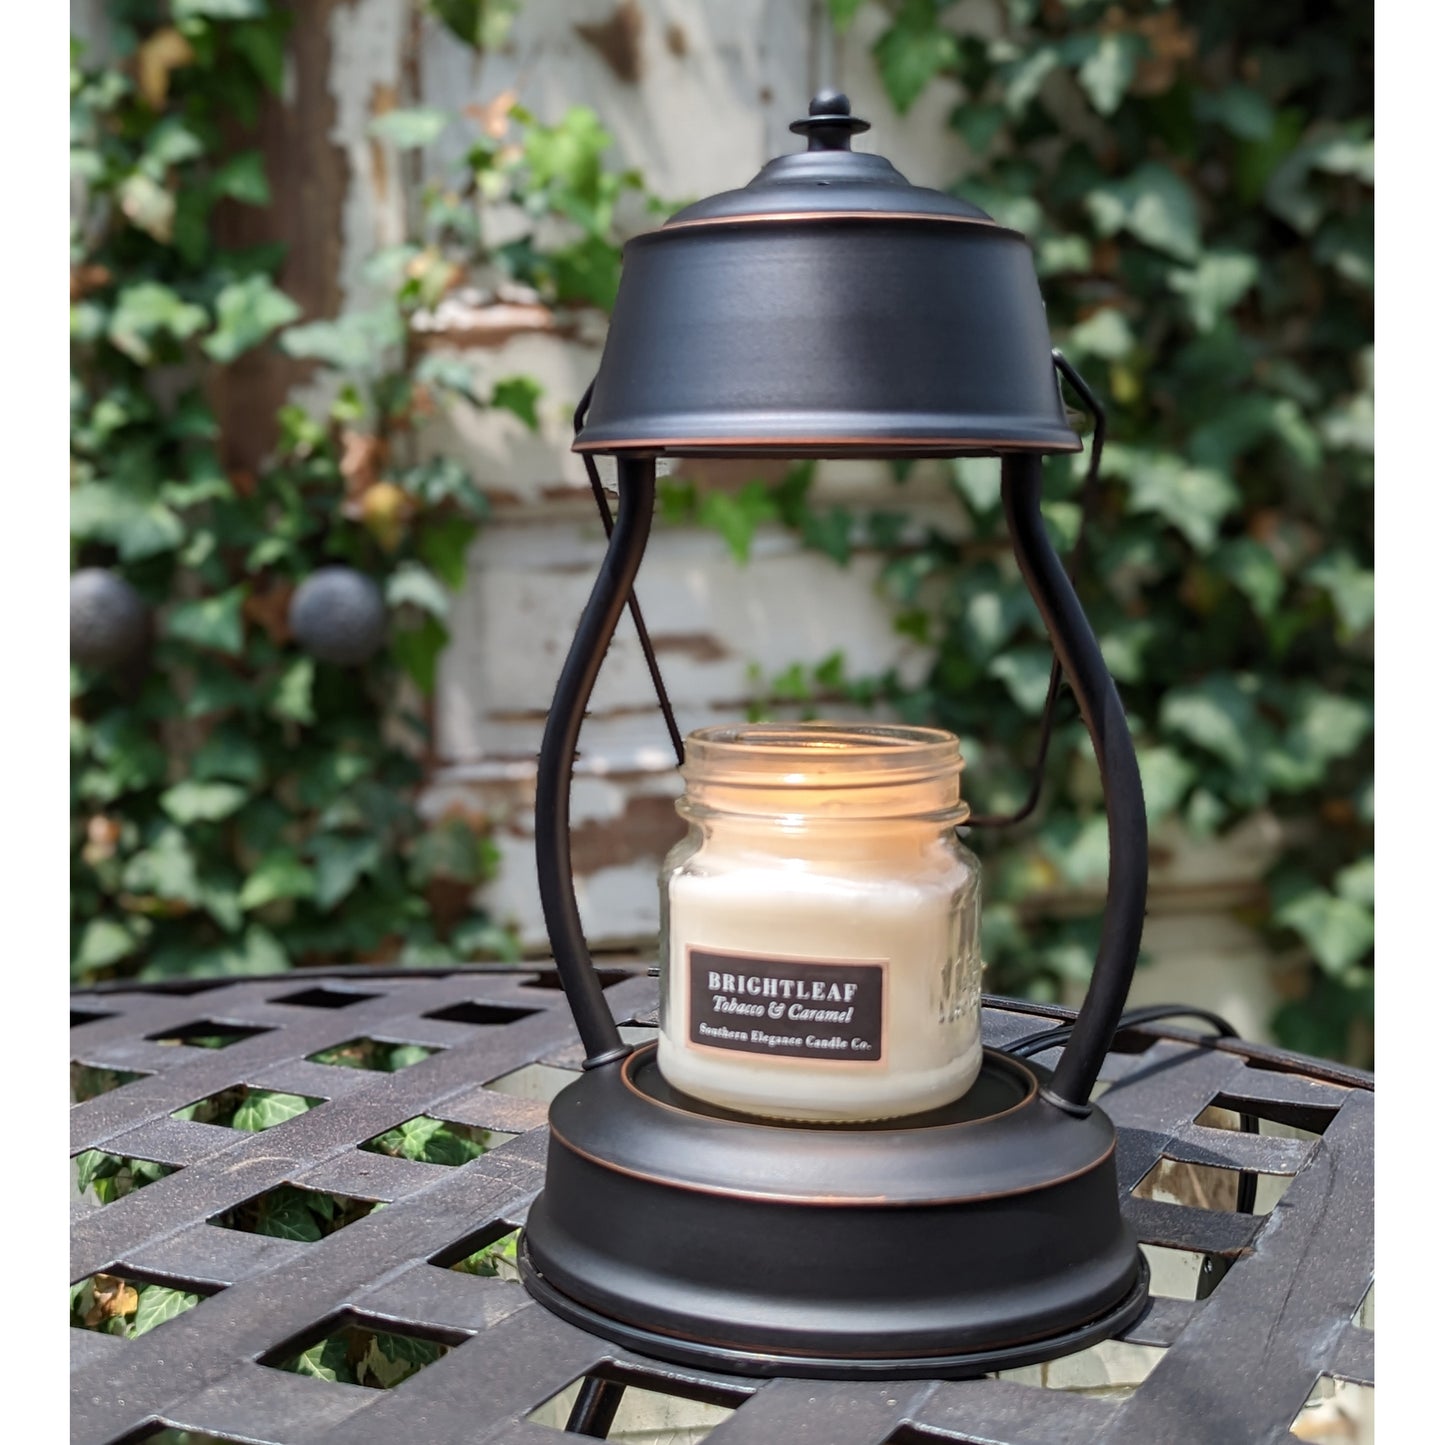 Image, rubbed bronze candle warmer on outdoor wrought iron table with lit small scented candle.